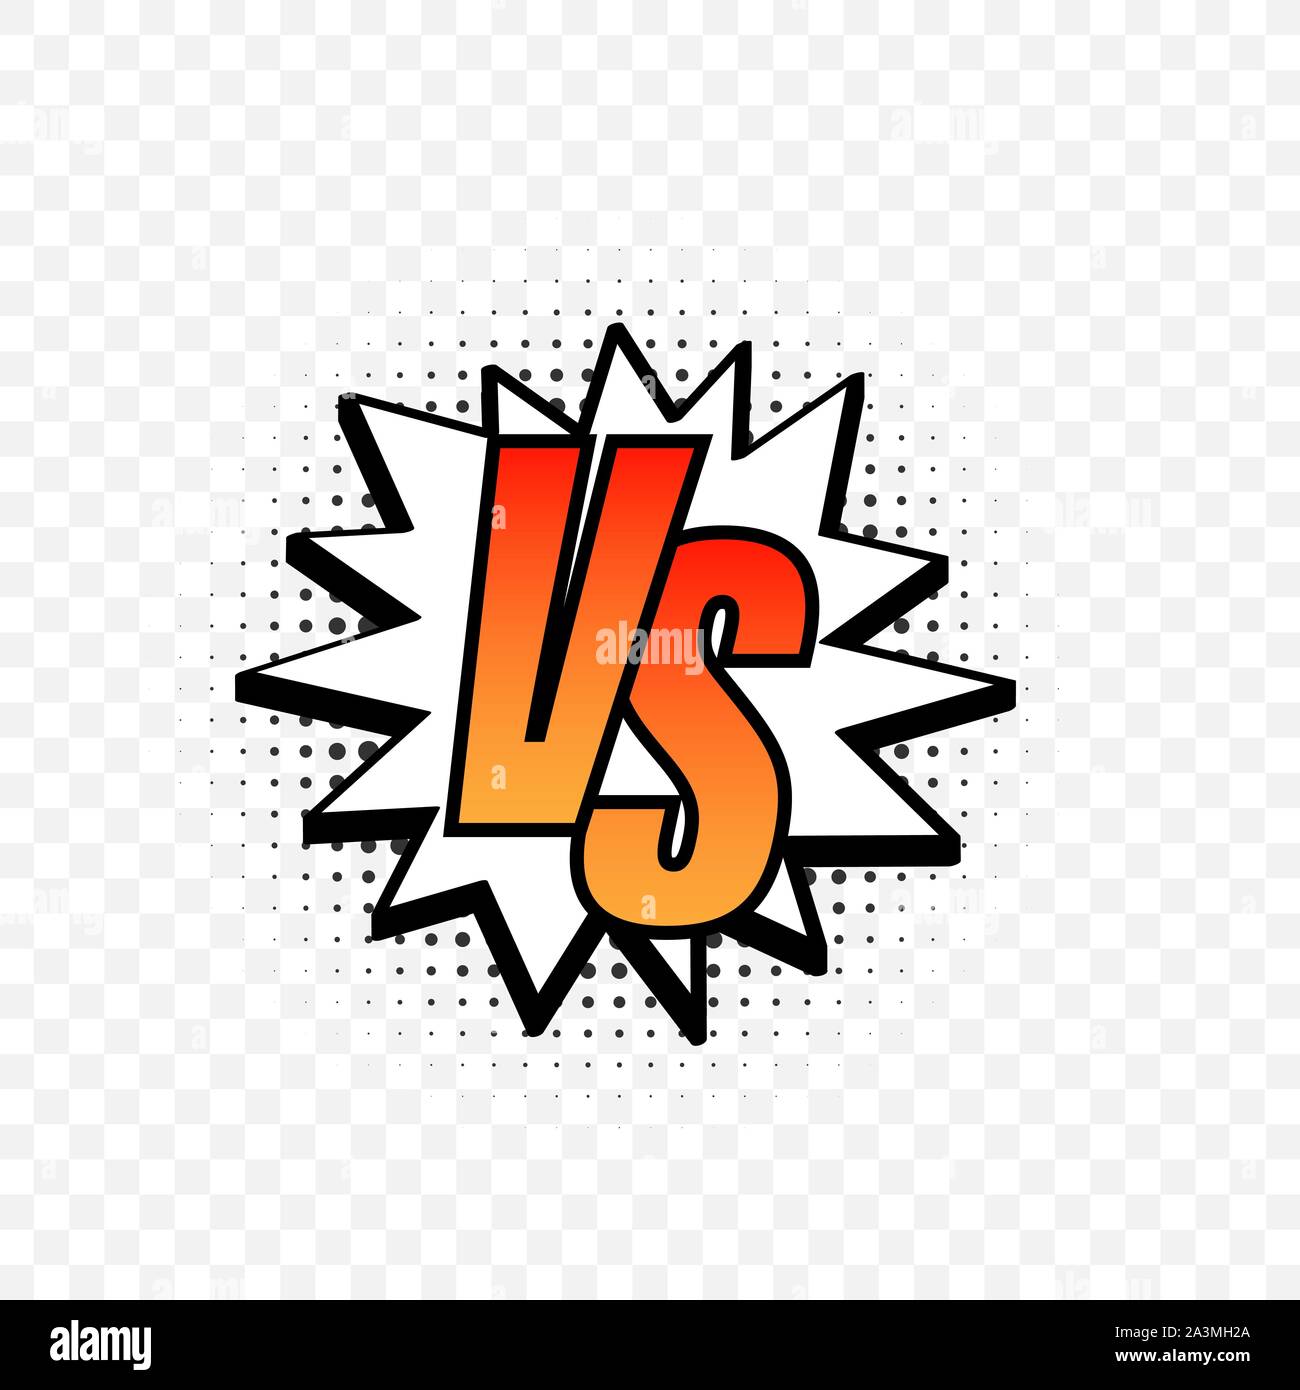 Versus logo vs letters for sports and fight competition. Vector illustration. Stock Vector